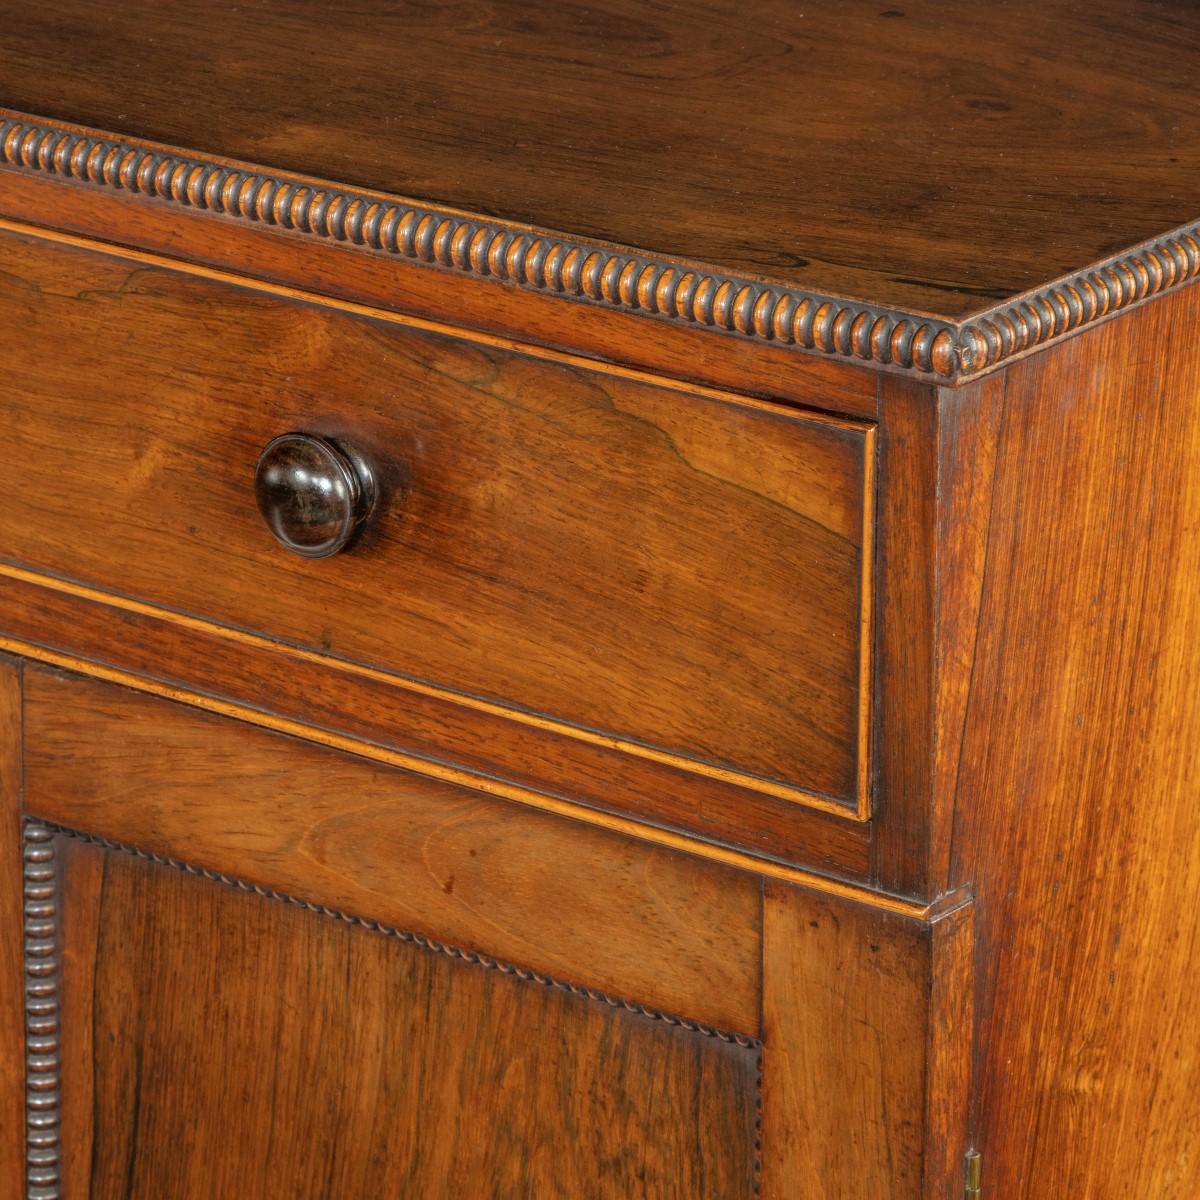 A pair of late Regency rosewood side cabinets, attributed to Gillows, each of rectangular form with two panelled doors below a single long frieze drawer, decorated with reel and bobbin beading, knob handles and turned, gadrooned feet. English, circa